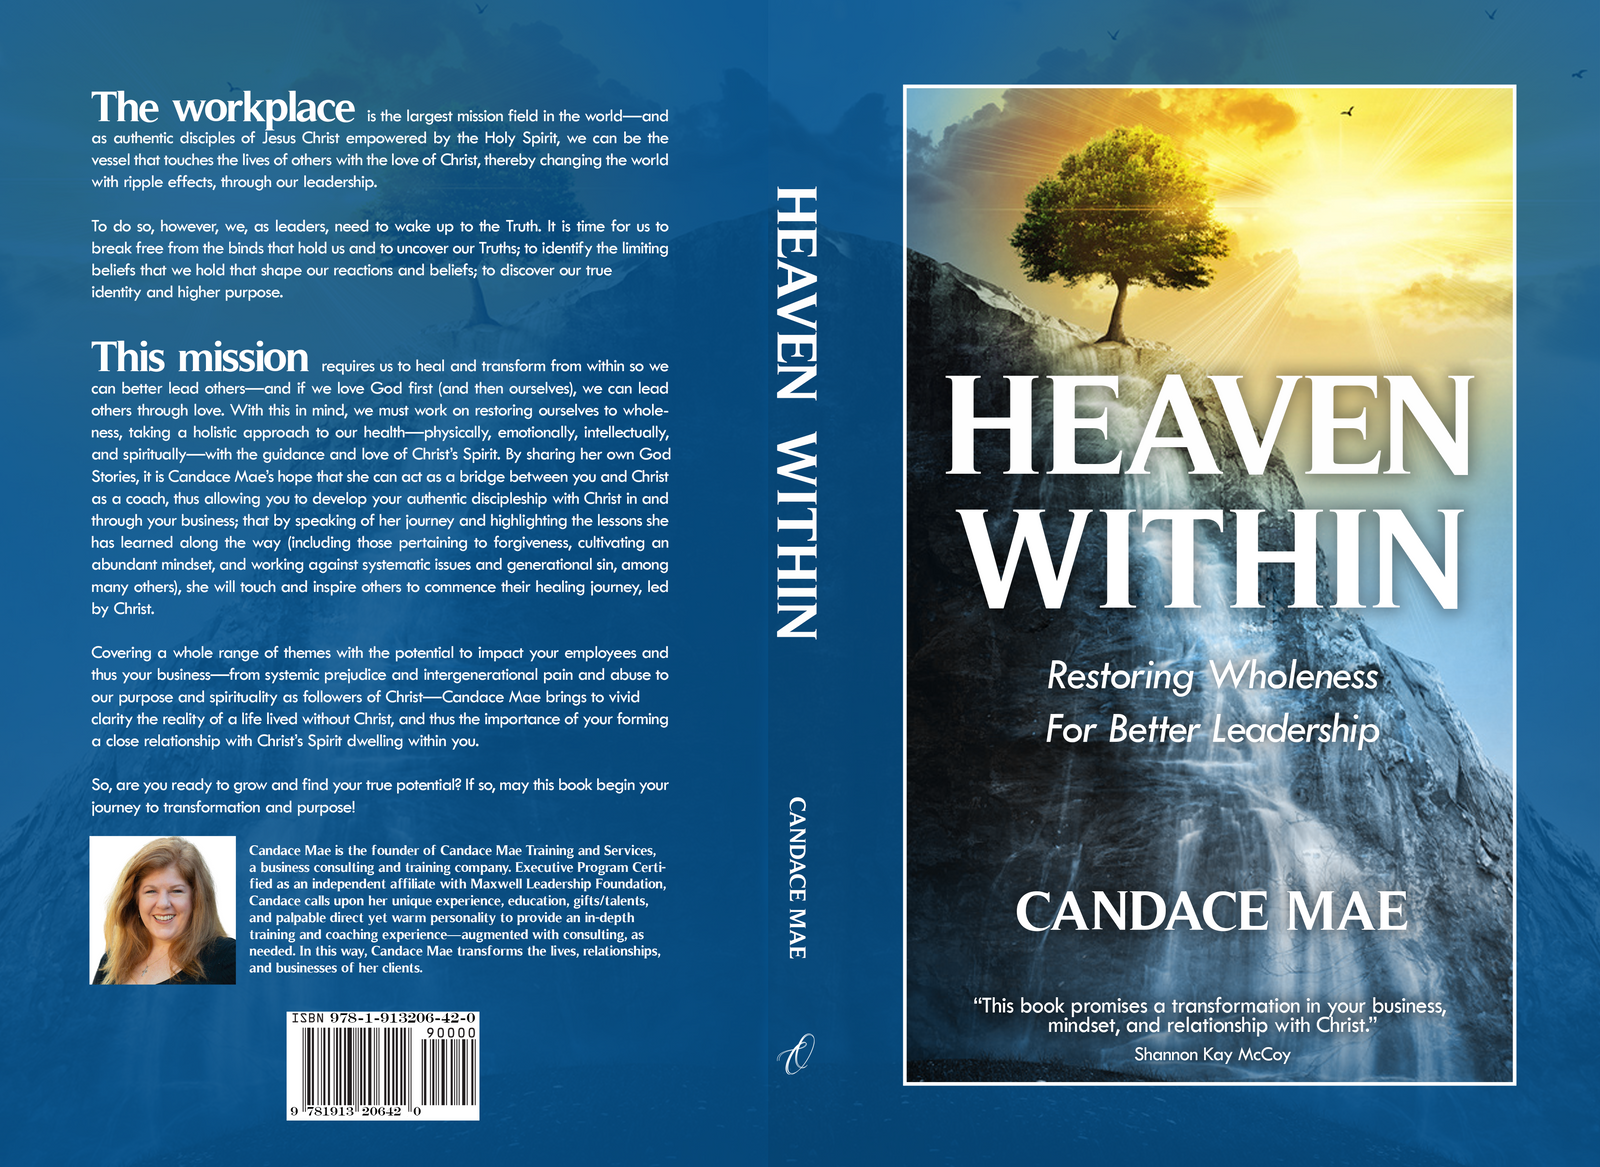 Heaven Within - Restoring Wholeness For Better Leadership